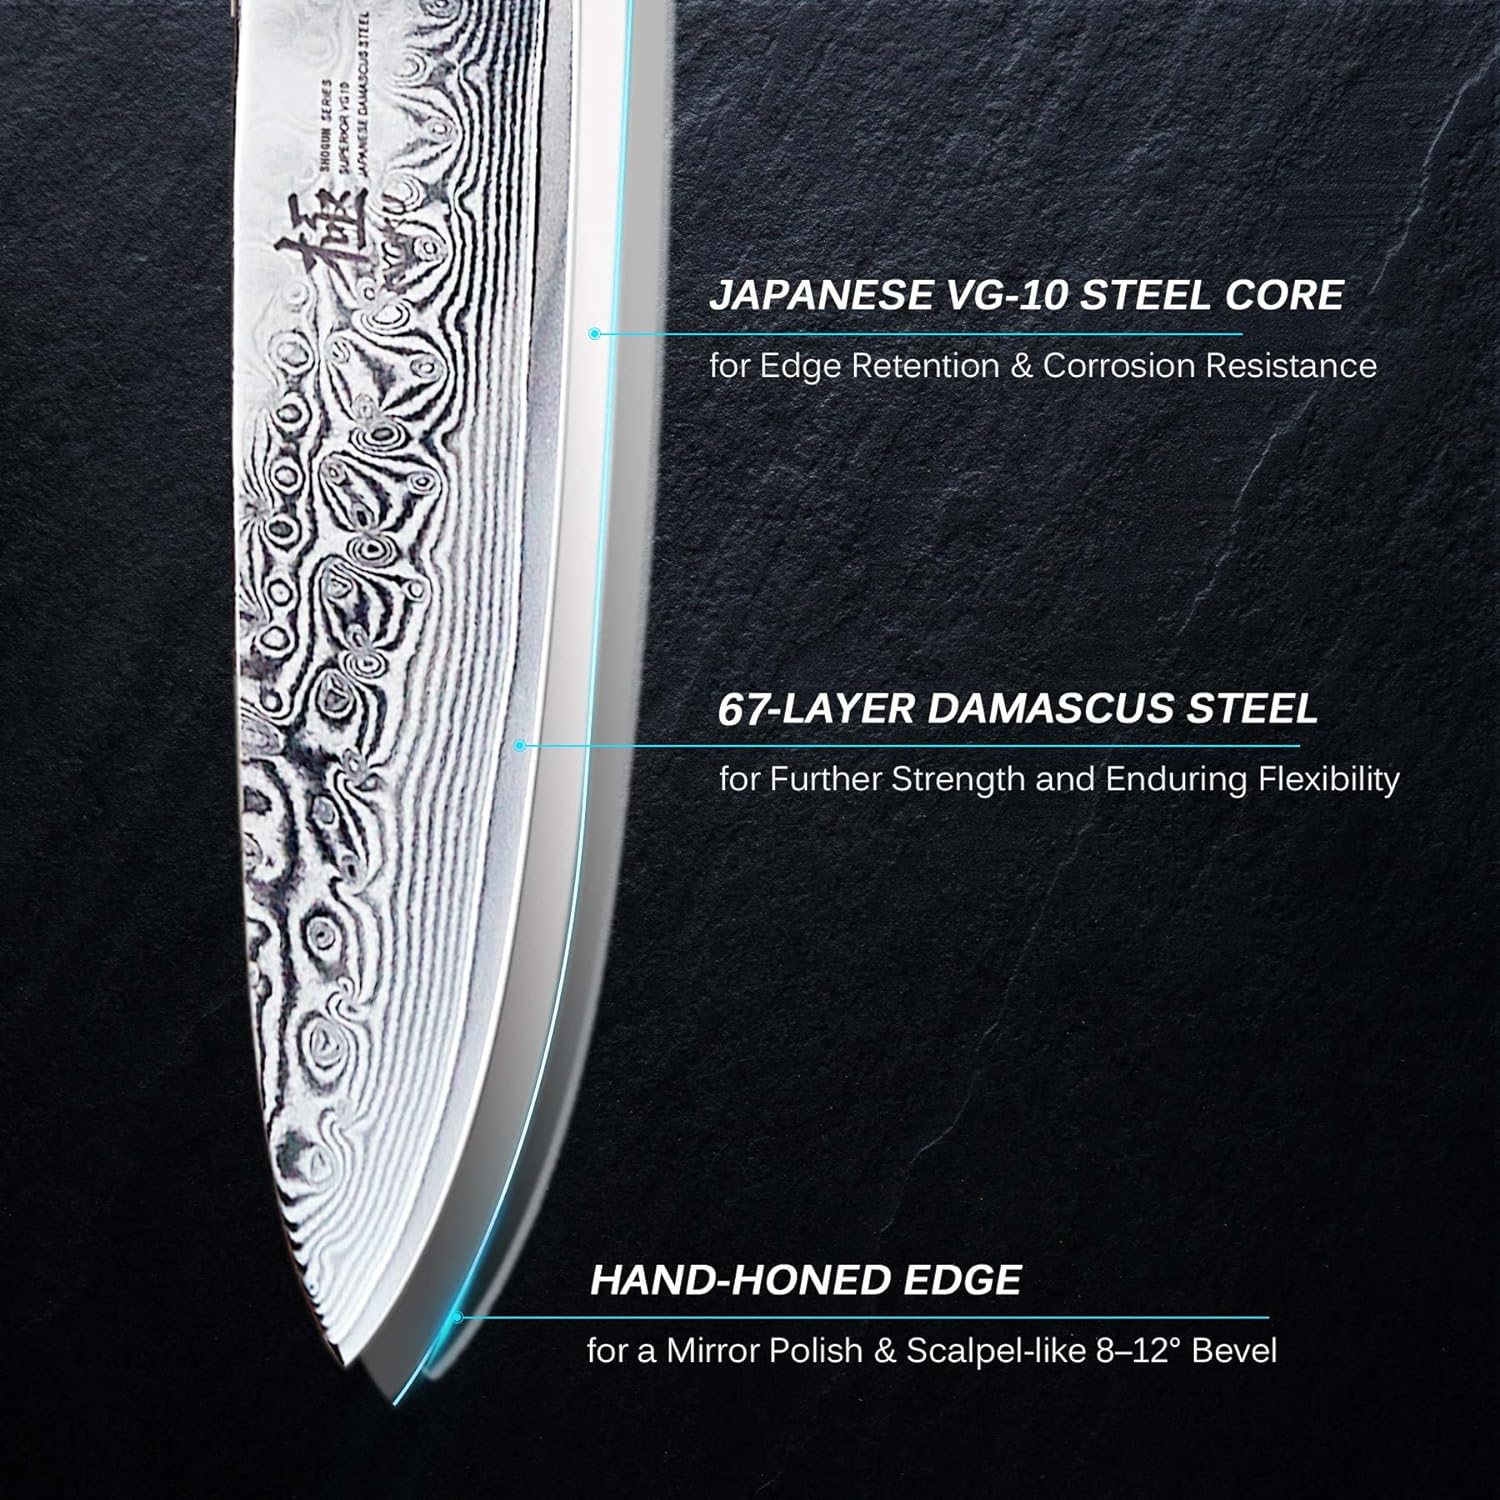 KYOKU Chef Utility Knife - 6 - Shogun Series - Japanese VG10 Steel Core Forged Damascus Blade - with Sheath  Case